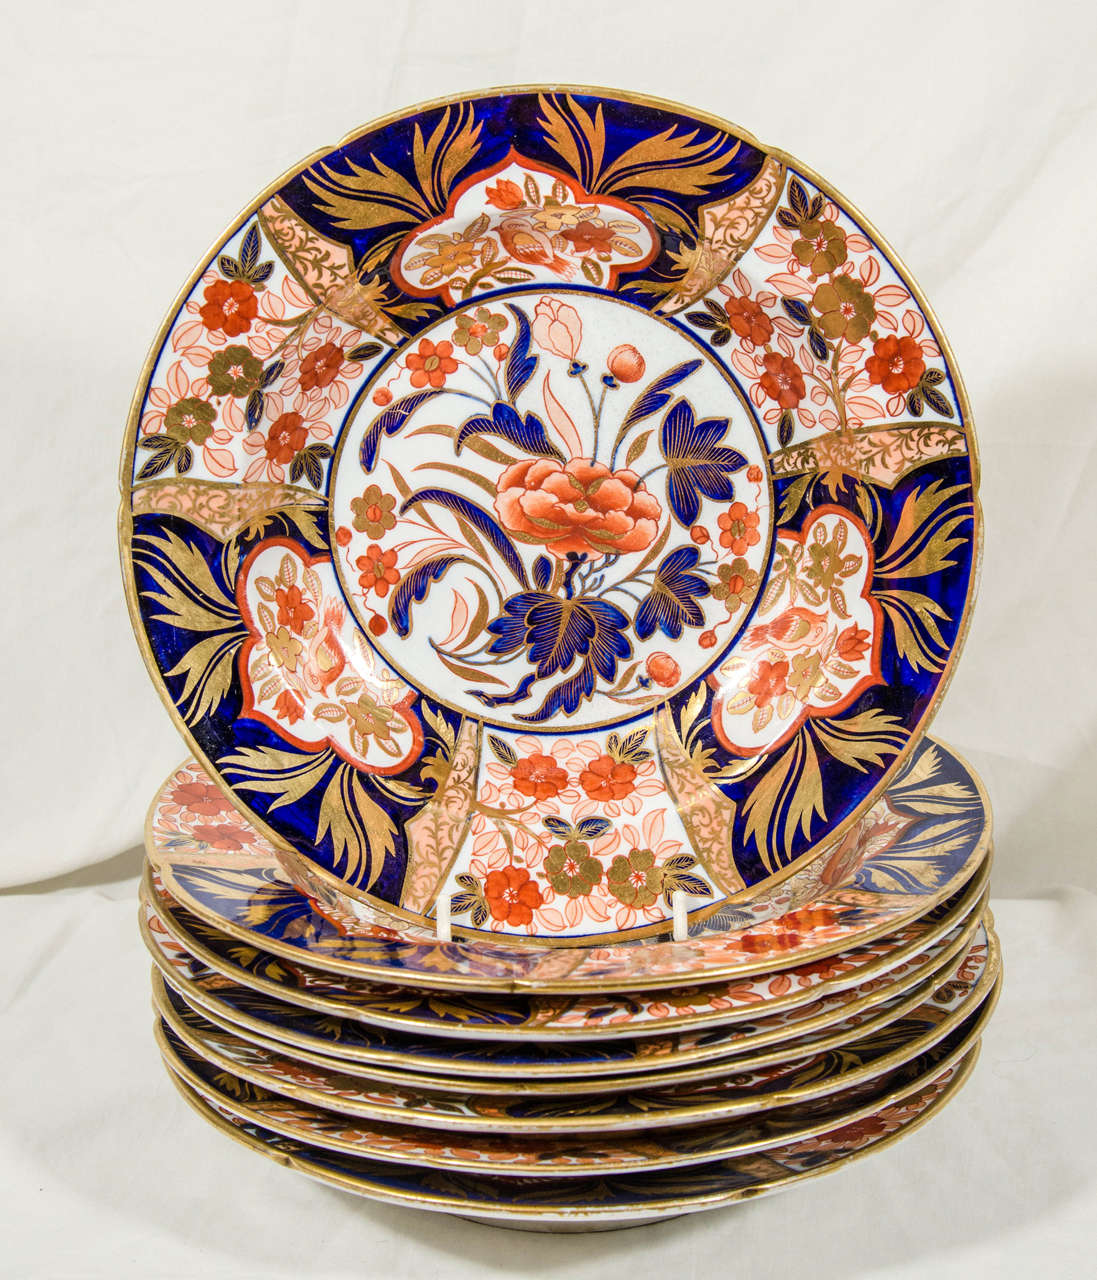 Hand-Painted Antique English Imari Dishes Made by Coalport